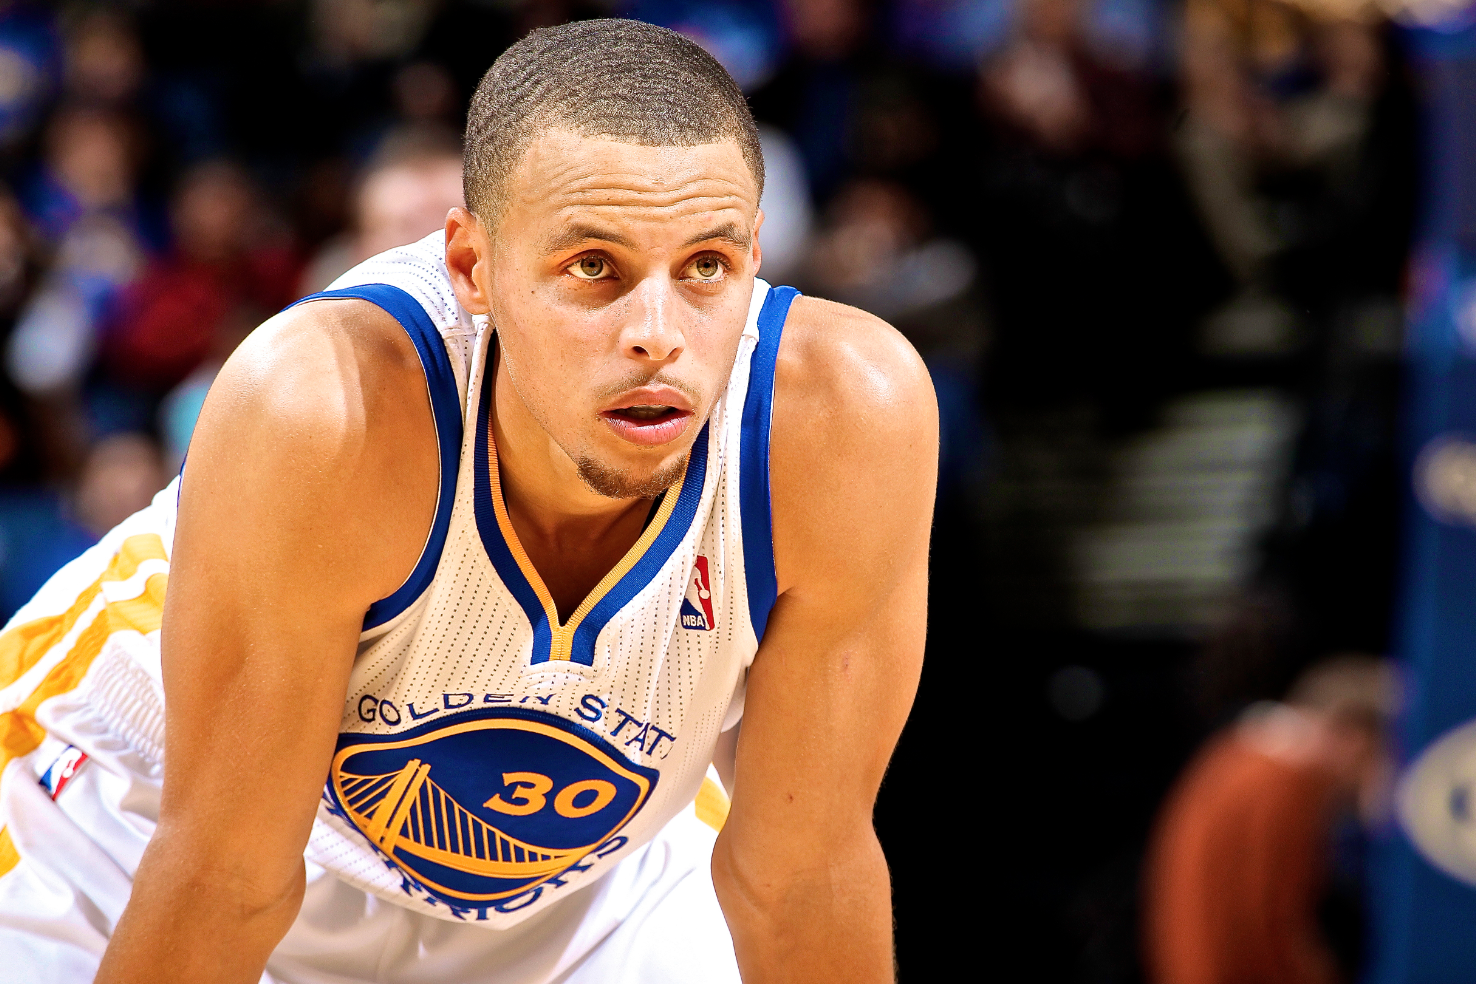 NBA All-Star Game 2013 Snubs: Why Stephen Curry Is Biggest Snub | Bleacher Report